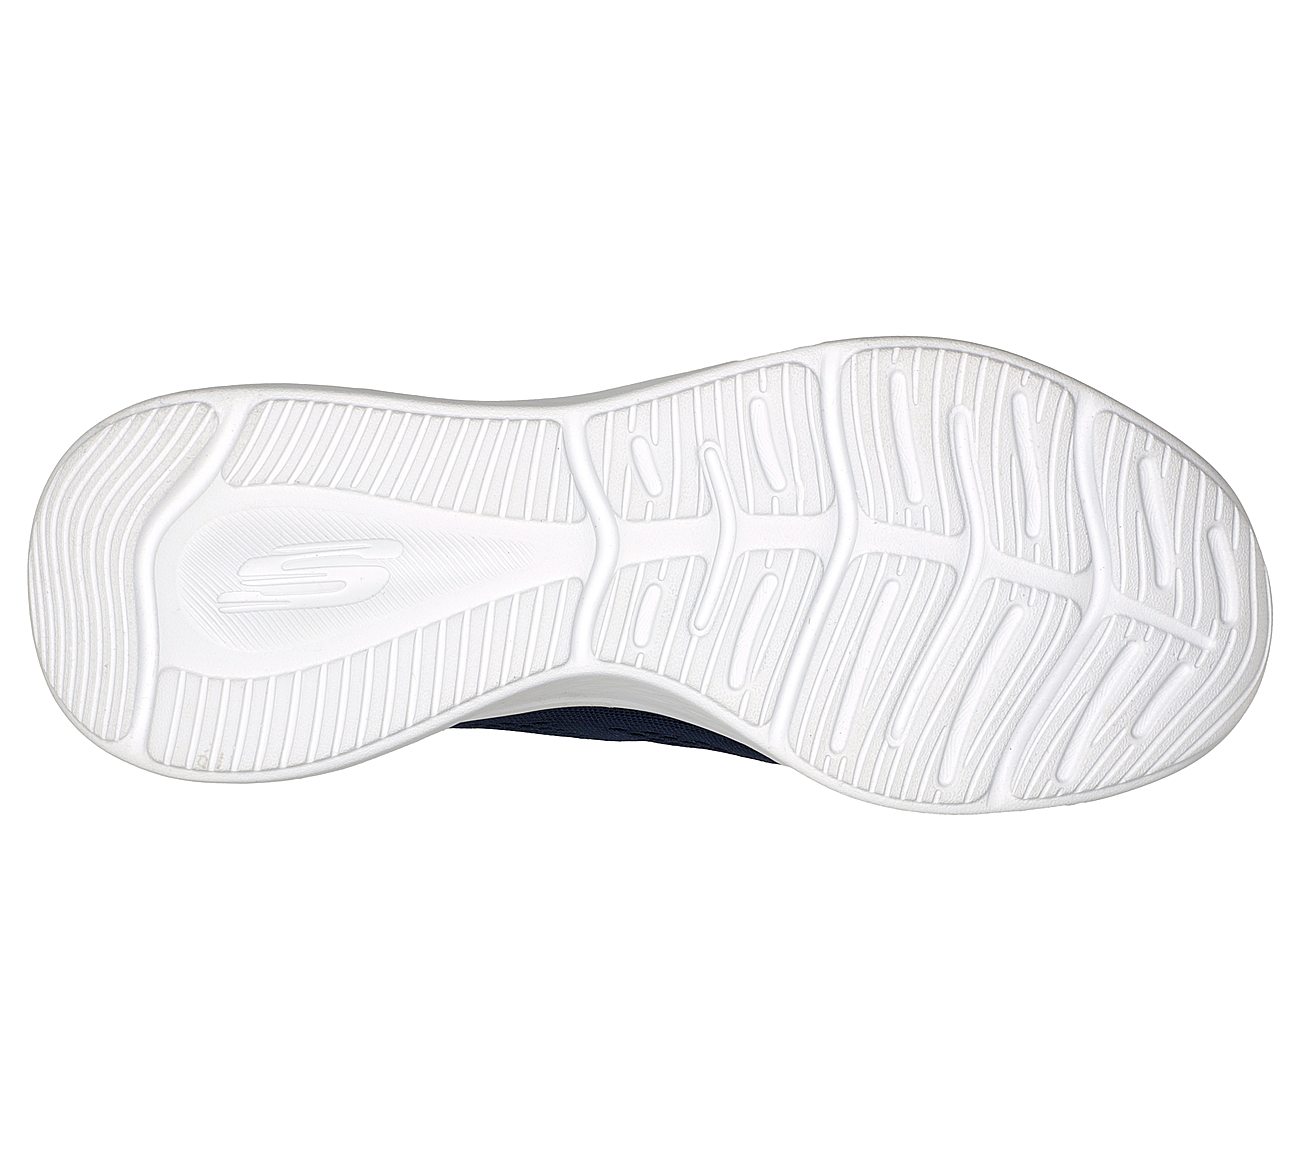 SKECH-LITE PRO-PERFECT TIME, NNNAVY Footwear Bottom View